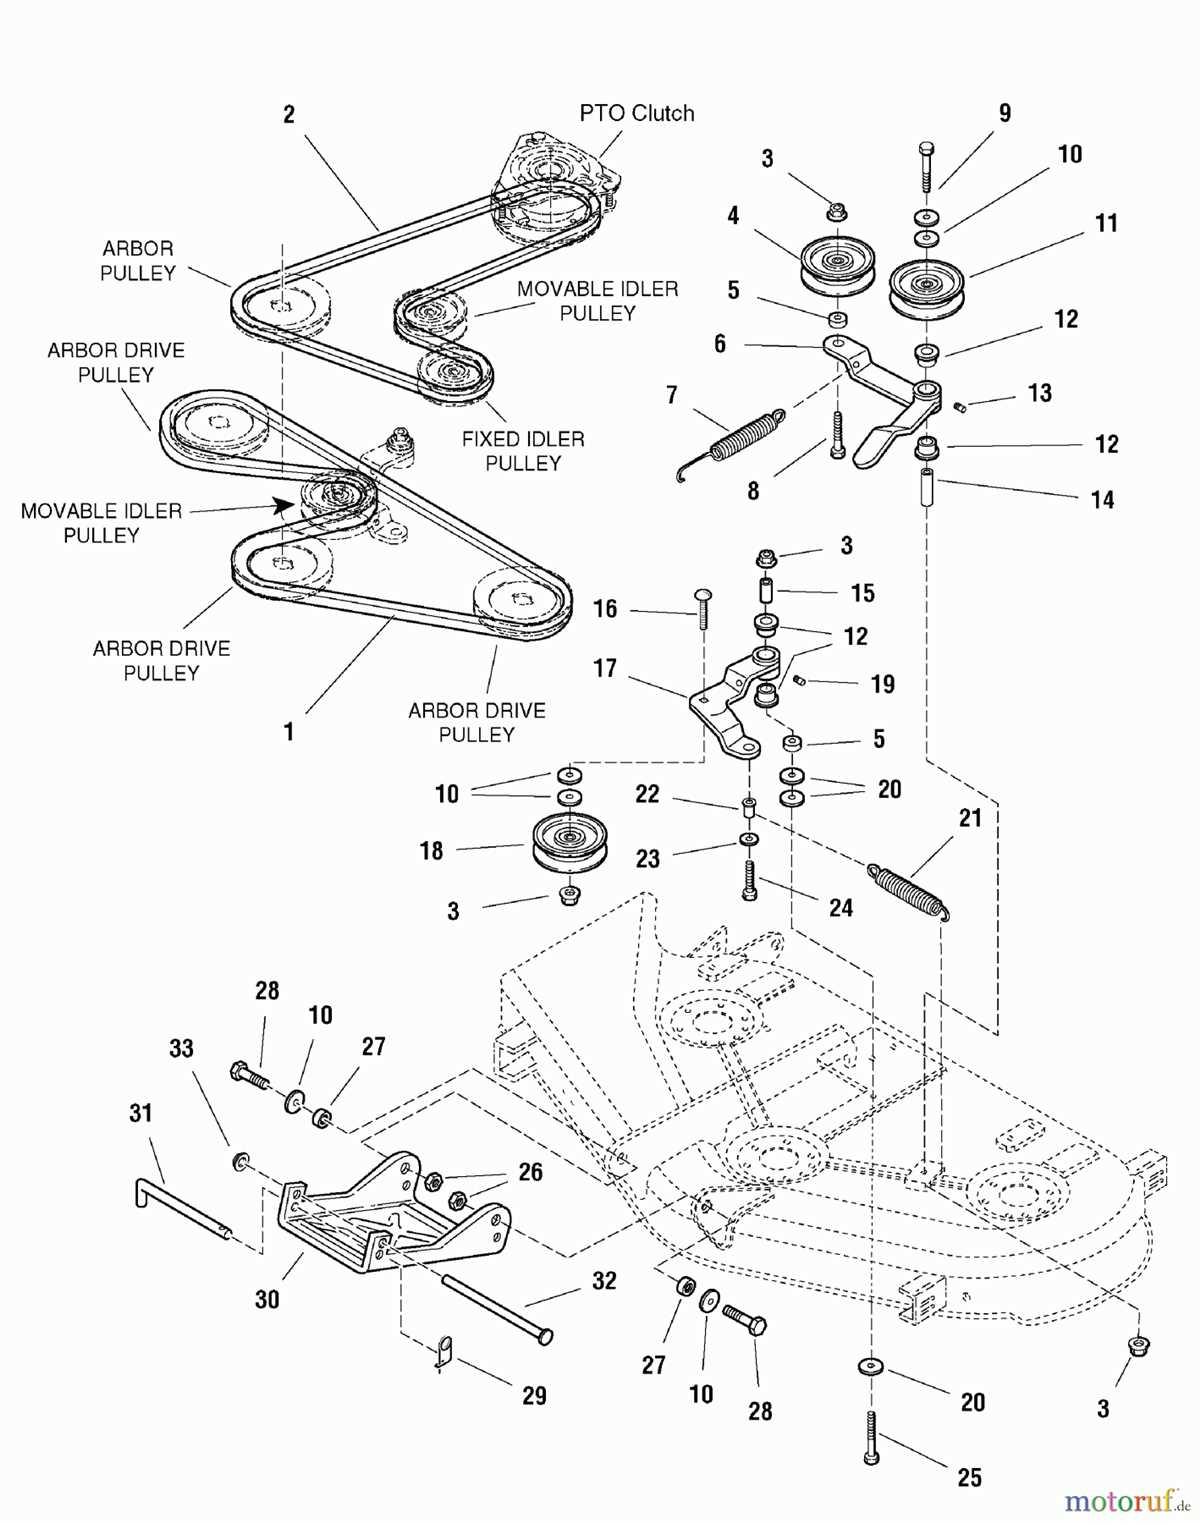 Common Problems and Solutions Related to Drive Belt in Craftsman ZTS 7000